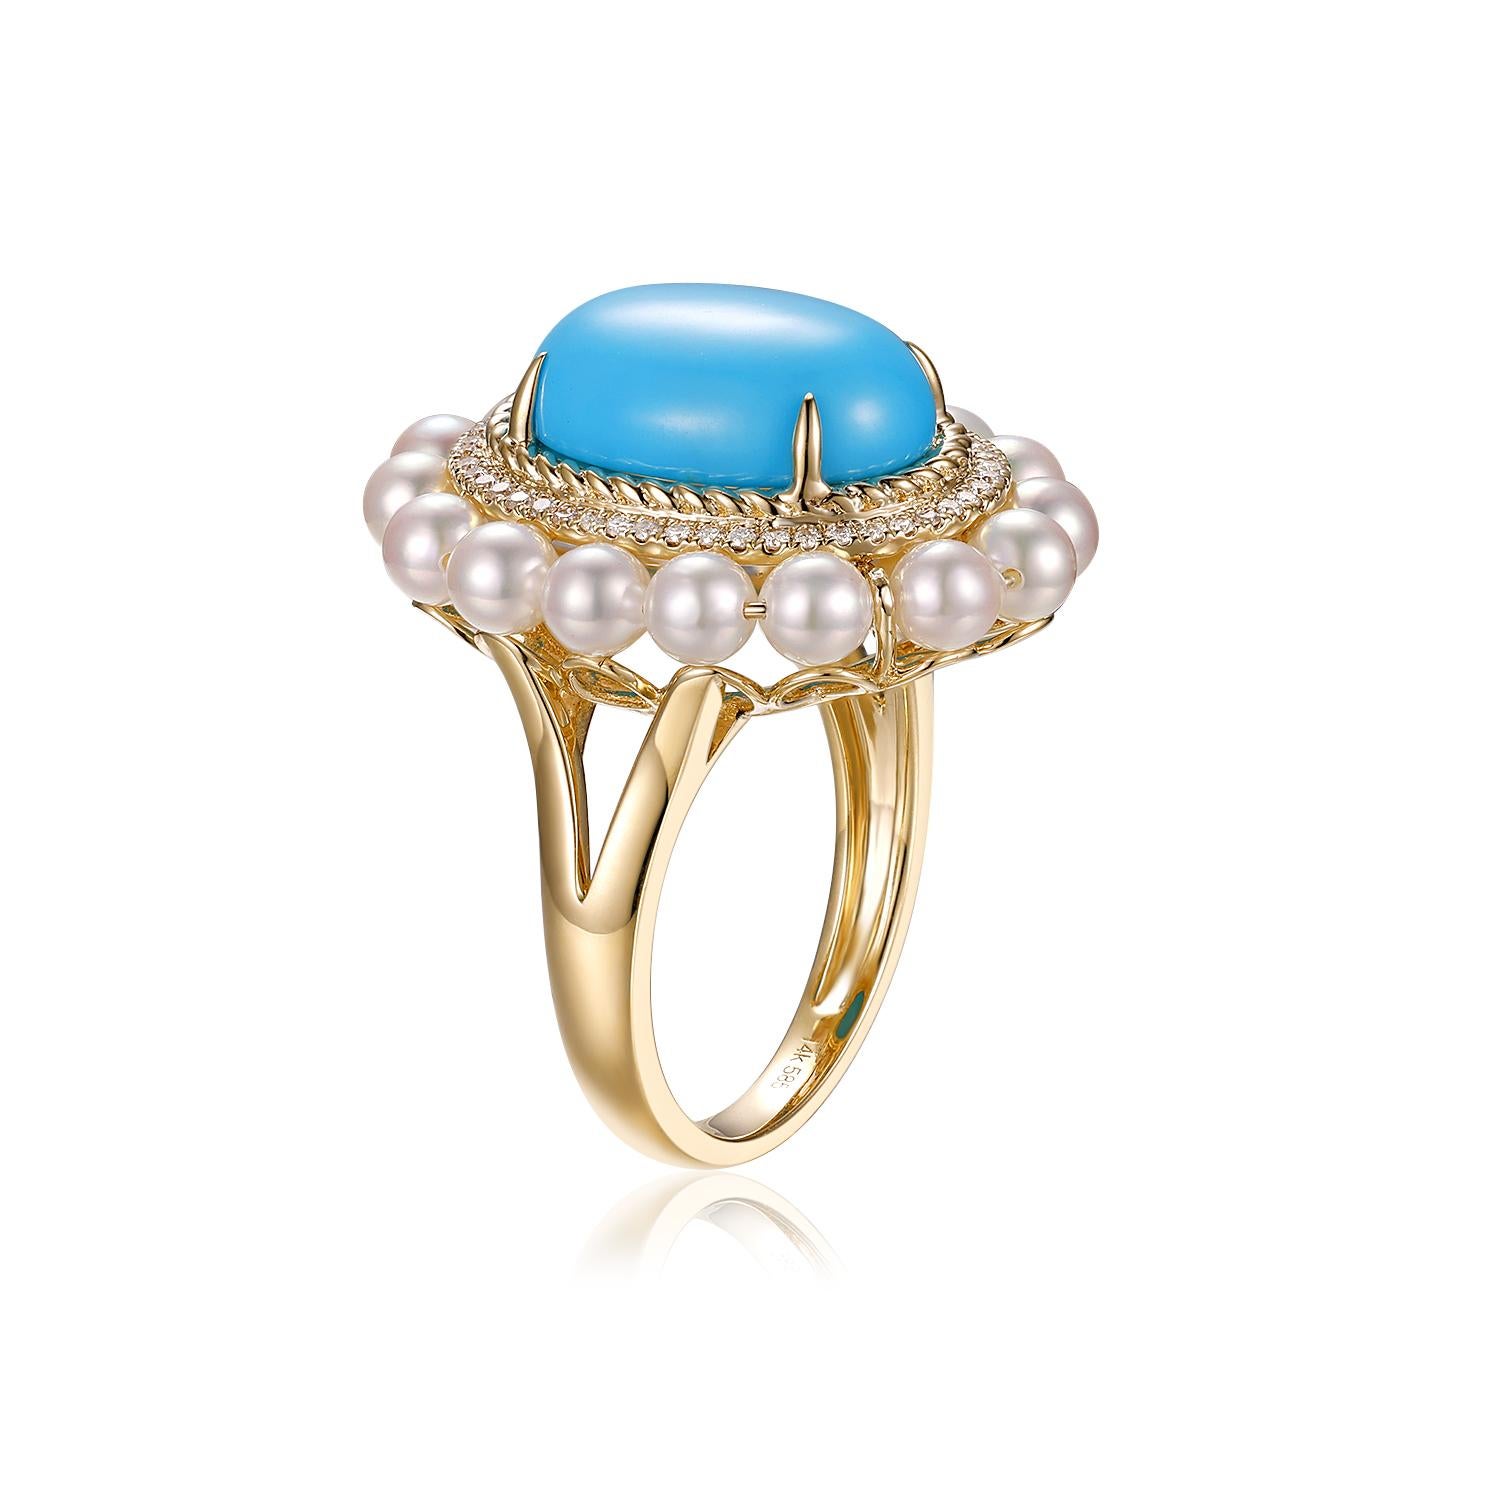 
This ring is an elegant composition of 14-karat yellow gold, featuring a central oval turquoise stone weighing 5.15 carats. The turquoise is notable for its vibrant, sky-blue color that has been cherished across civilizations for centuries, often